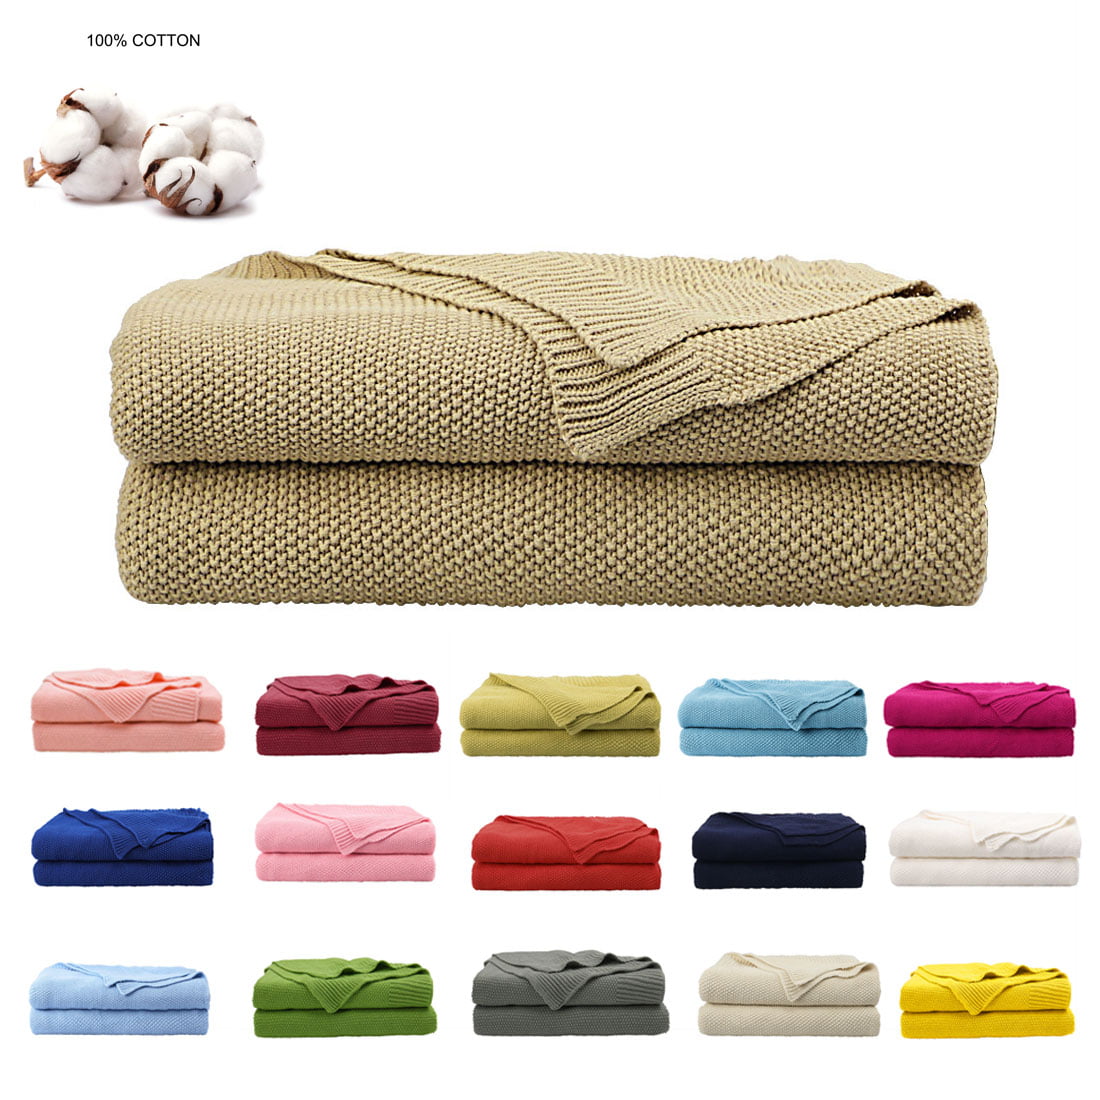 Cotton Throw Blanket Moss Stitch Solid Soft Sofa Couch Bed Decorative ...